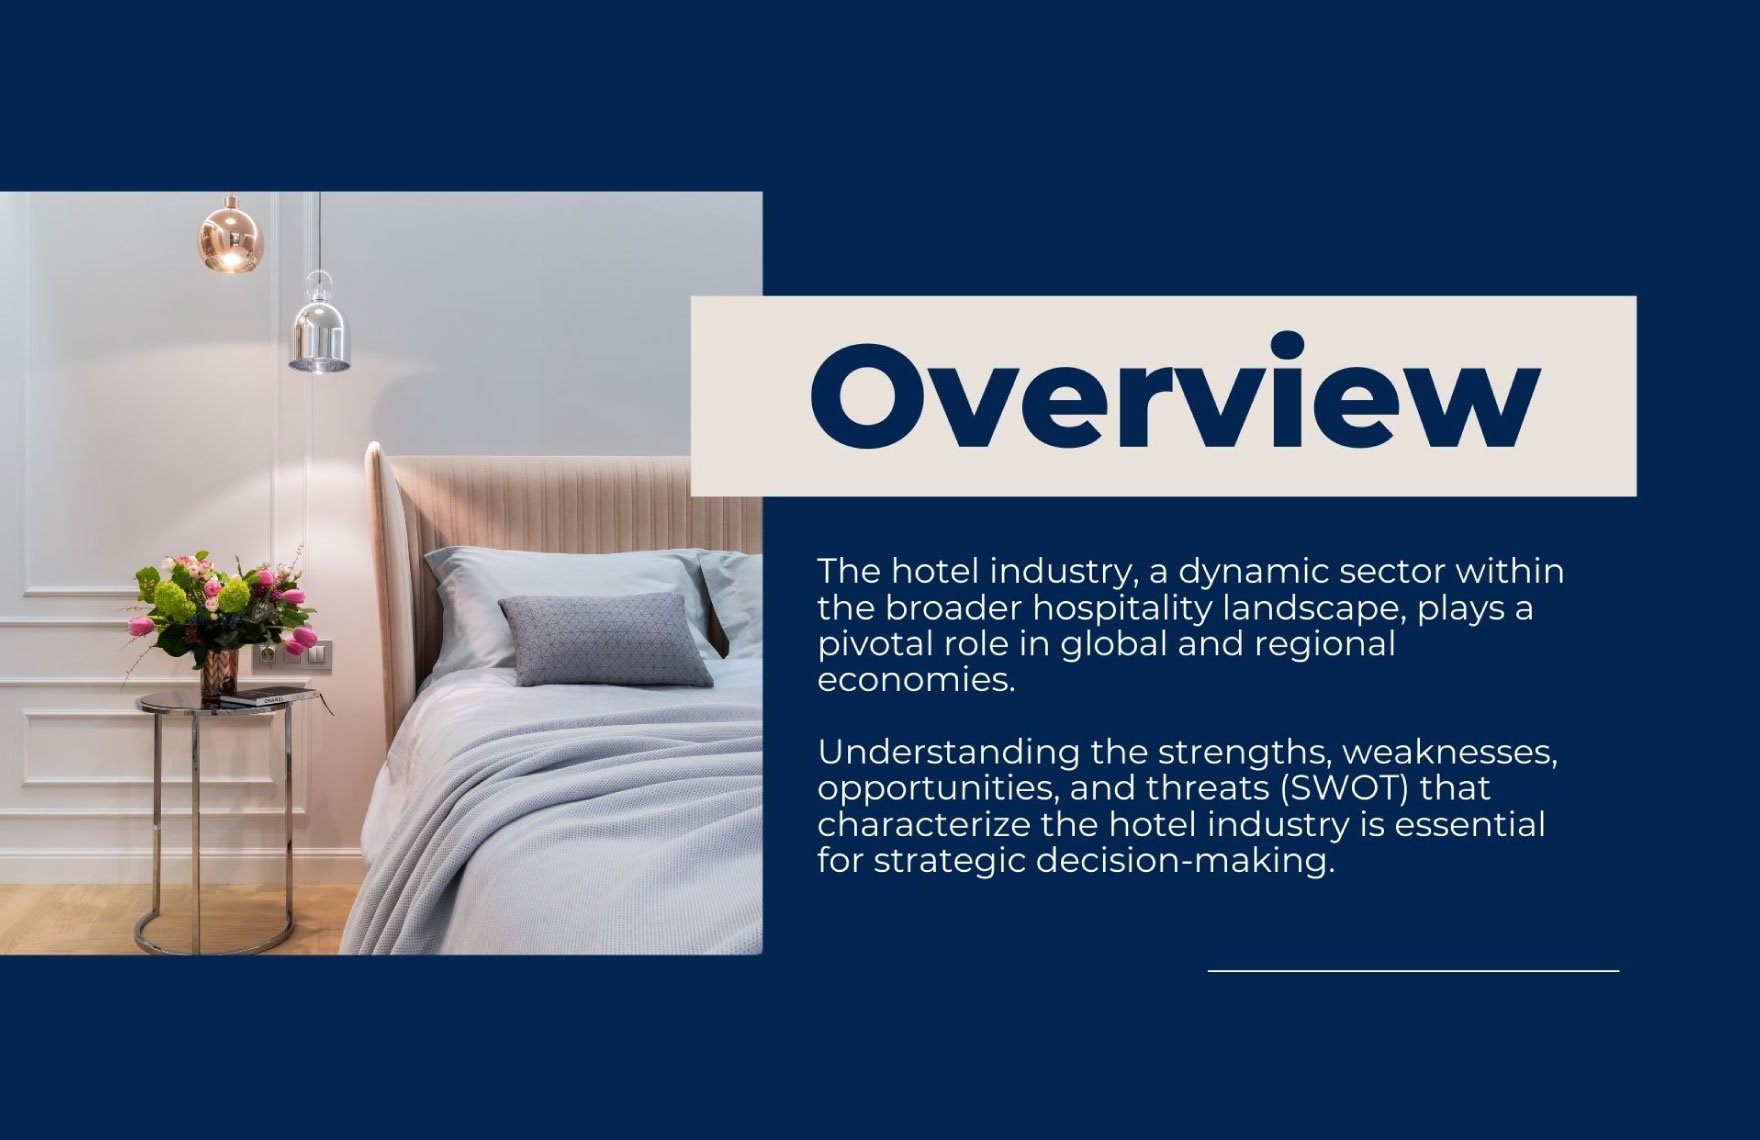 SWOT Analysis of Hotel Industry Template